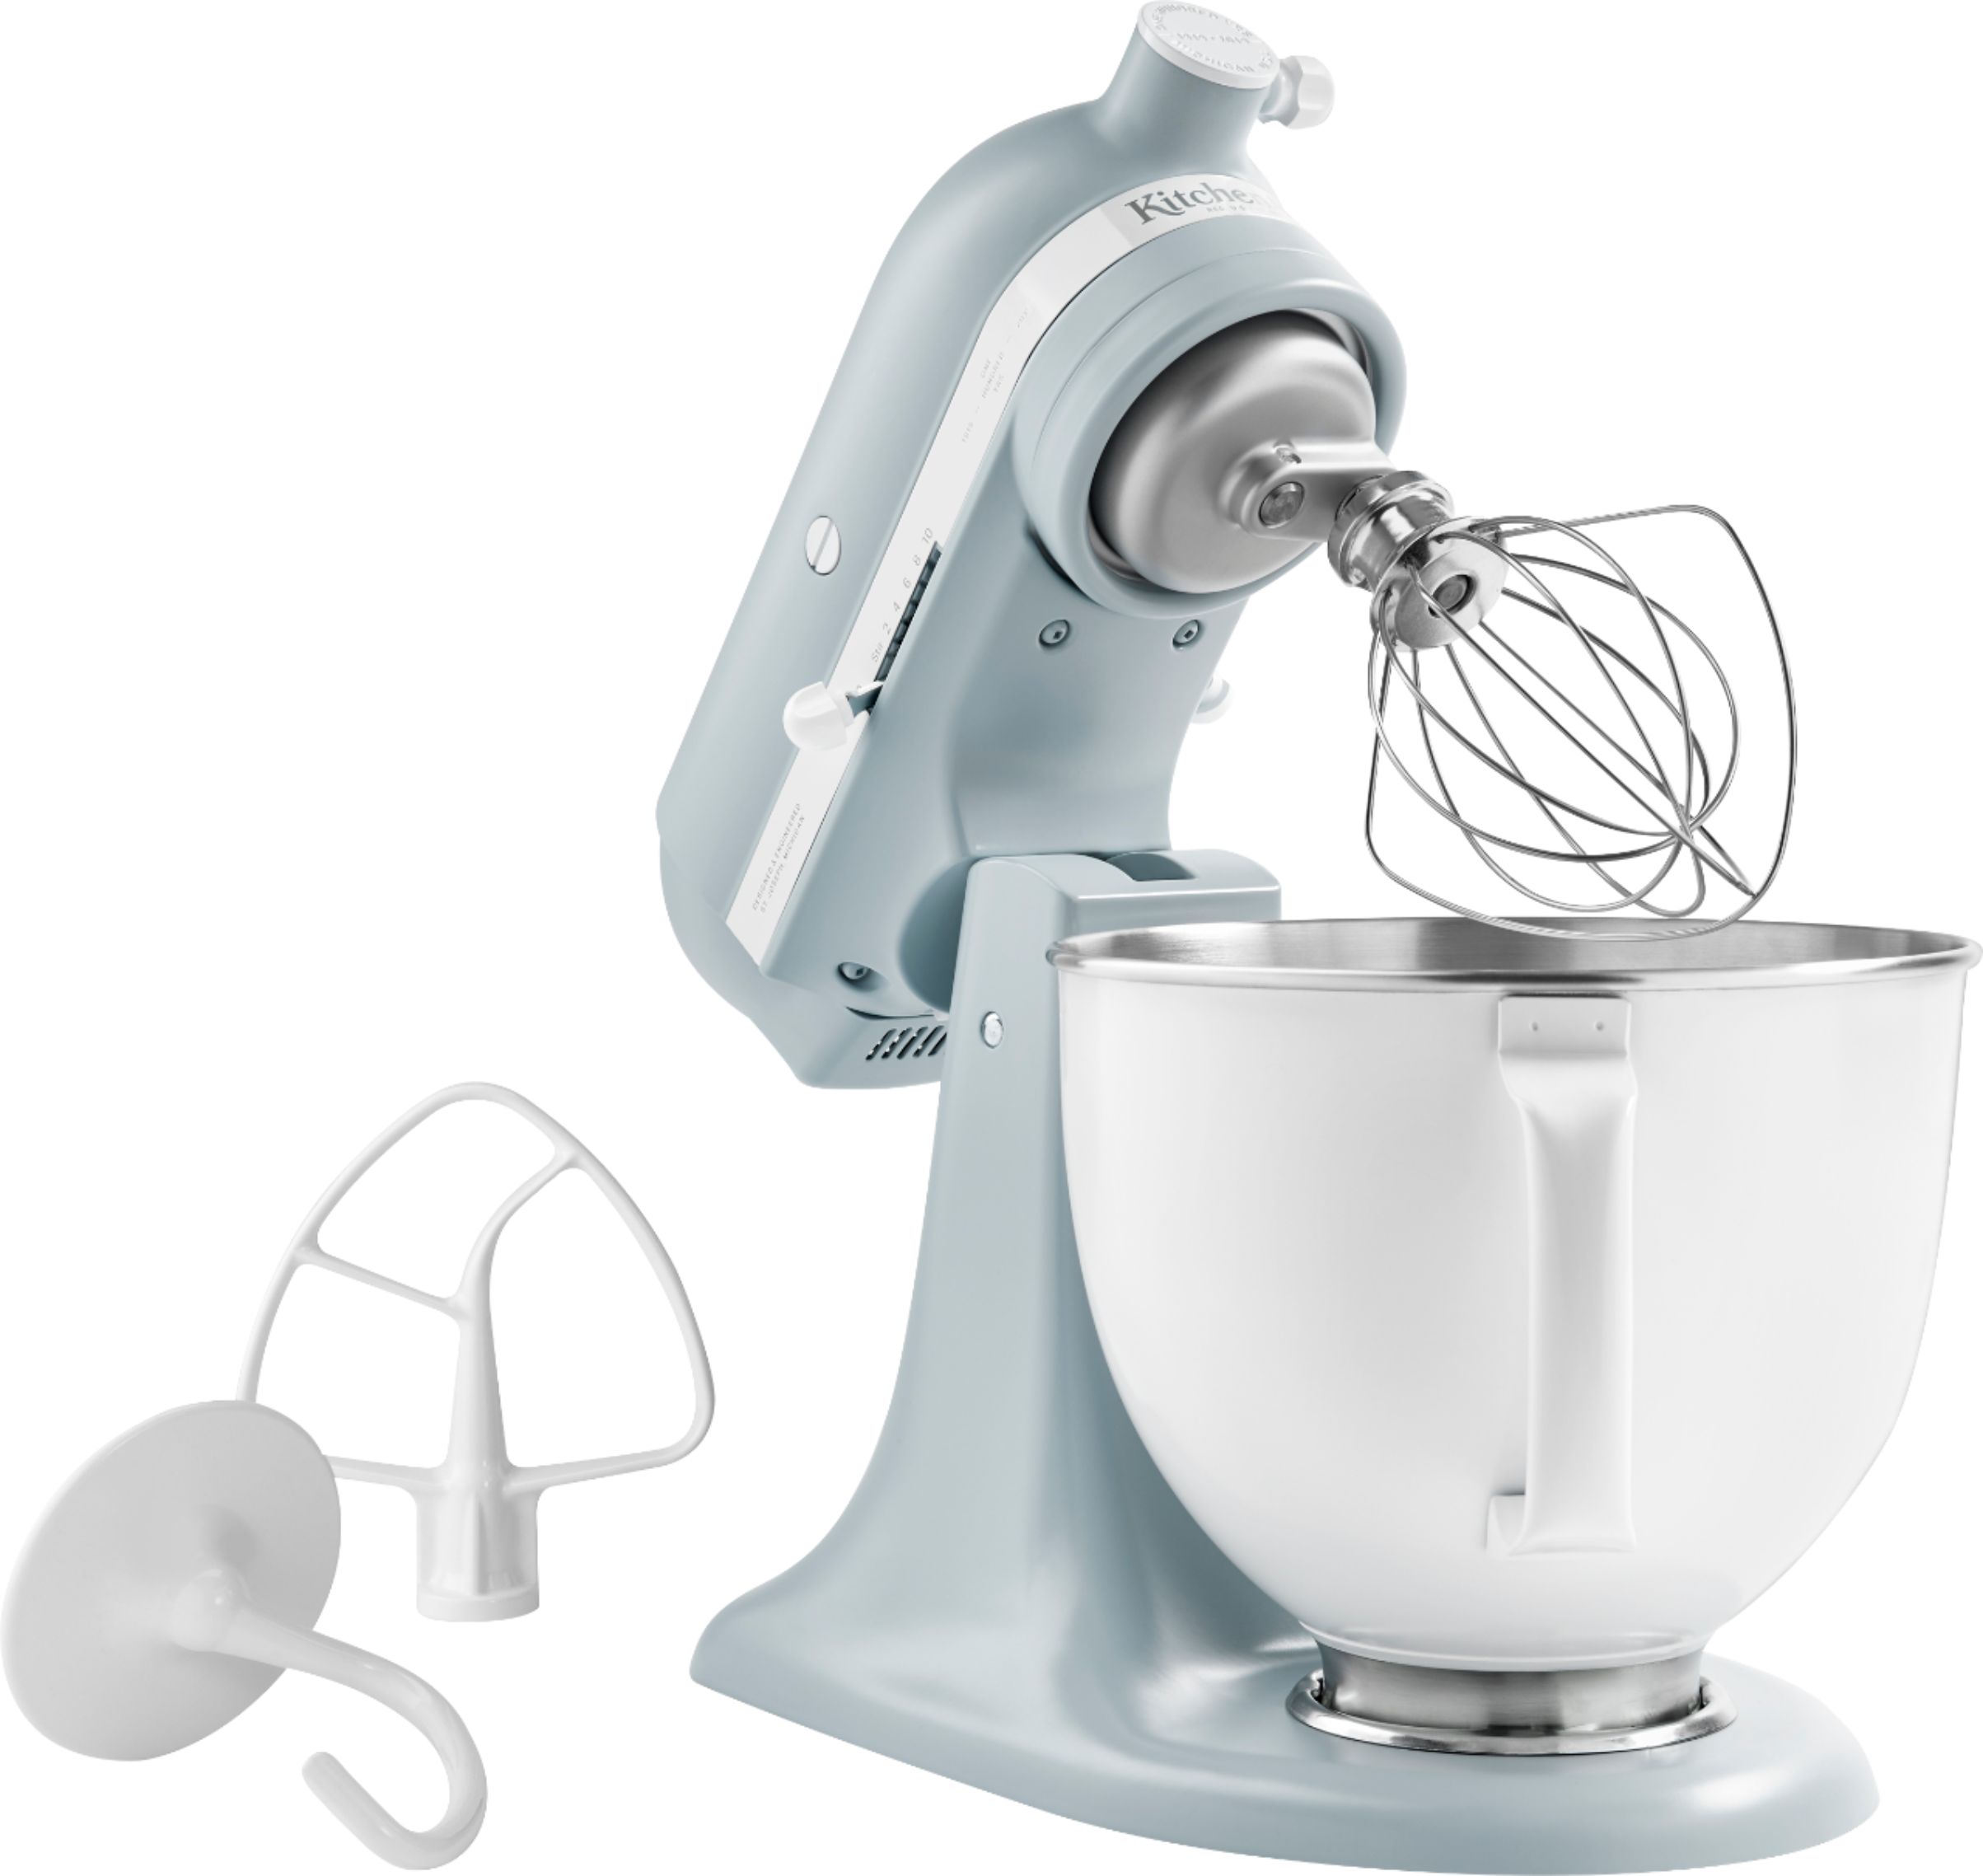 Kitchenaid Mixers for sale in Cub Run, Kentucky